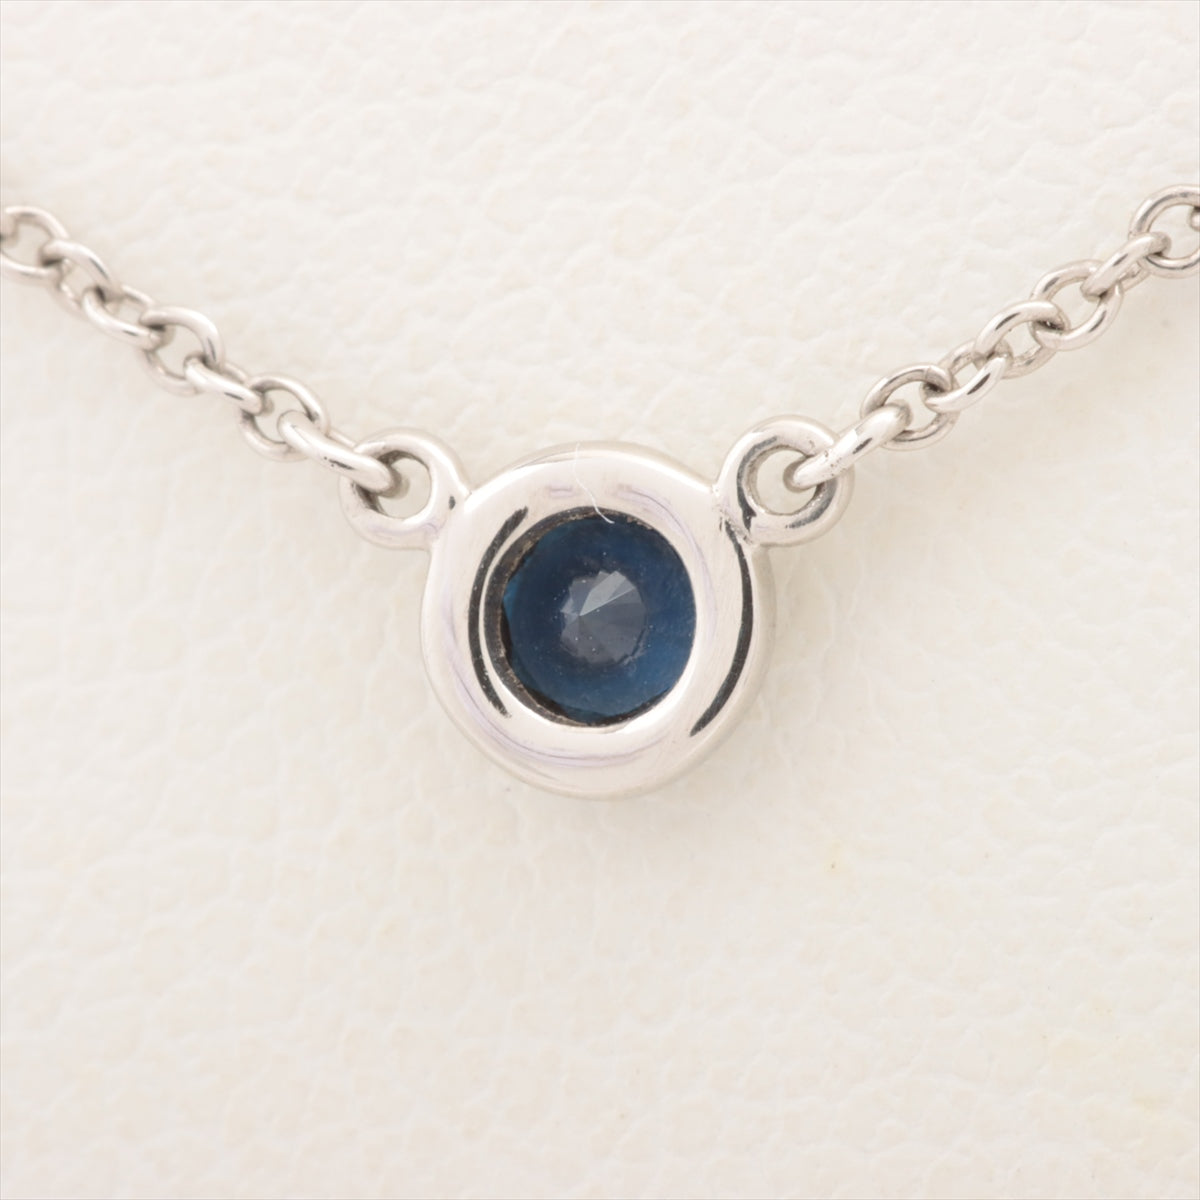 Tiffany Kolor By the Yard Sapphire Necklace Pt950 2.5g Diameter approx. 4.28 mm